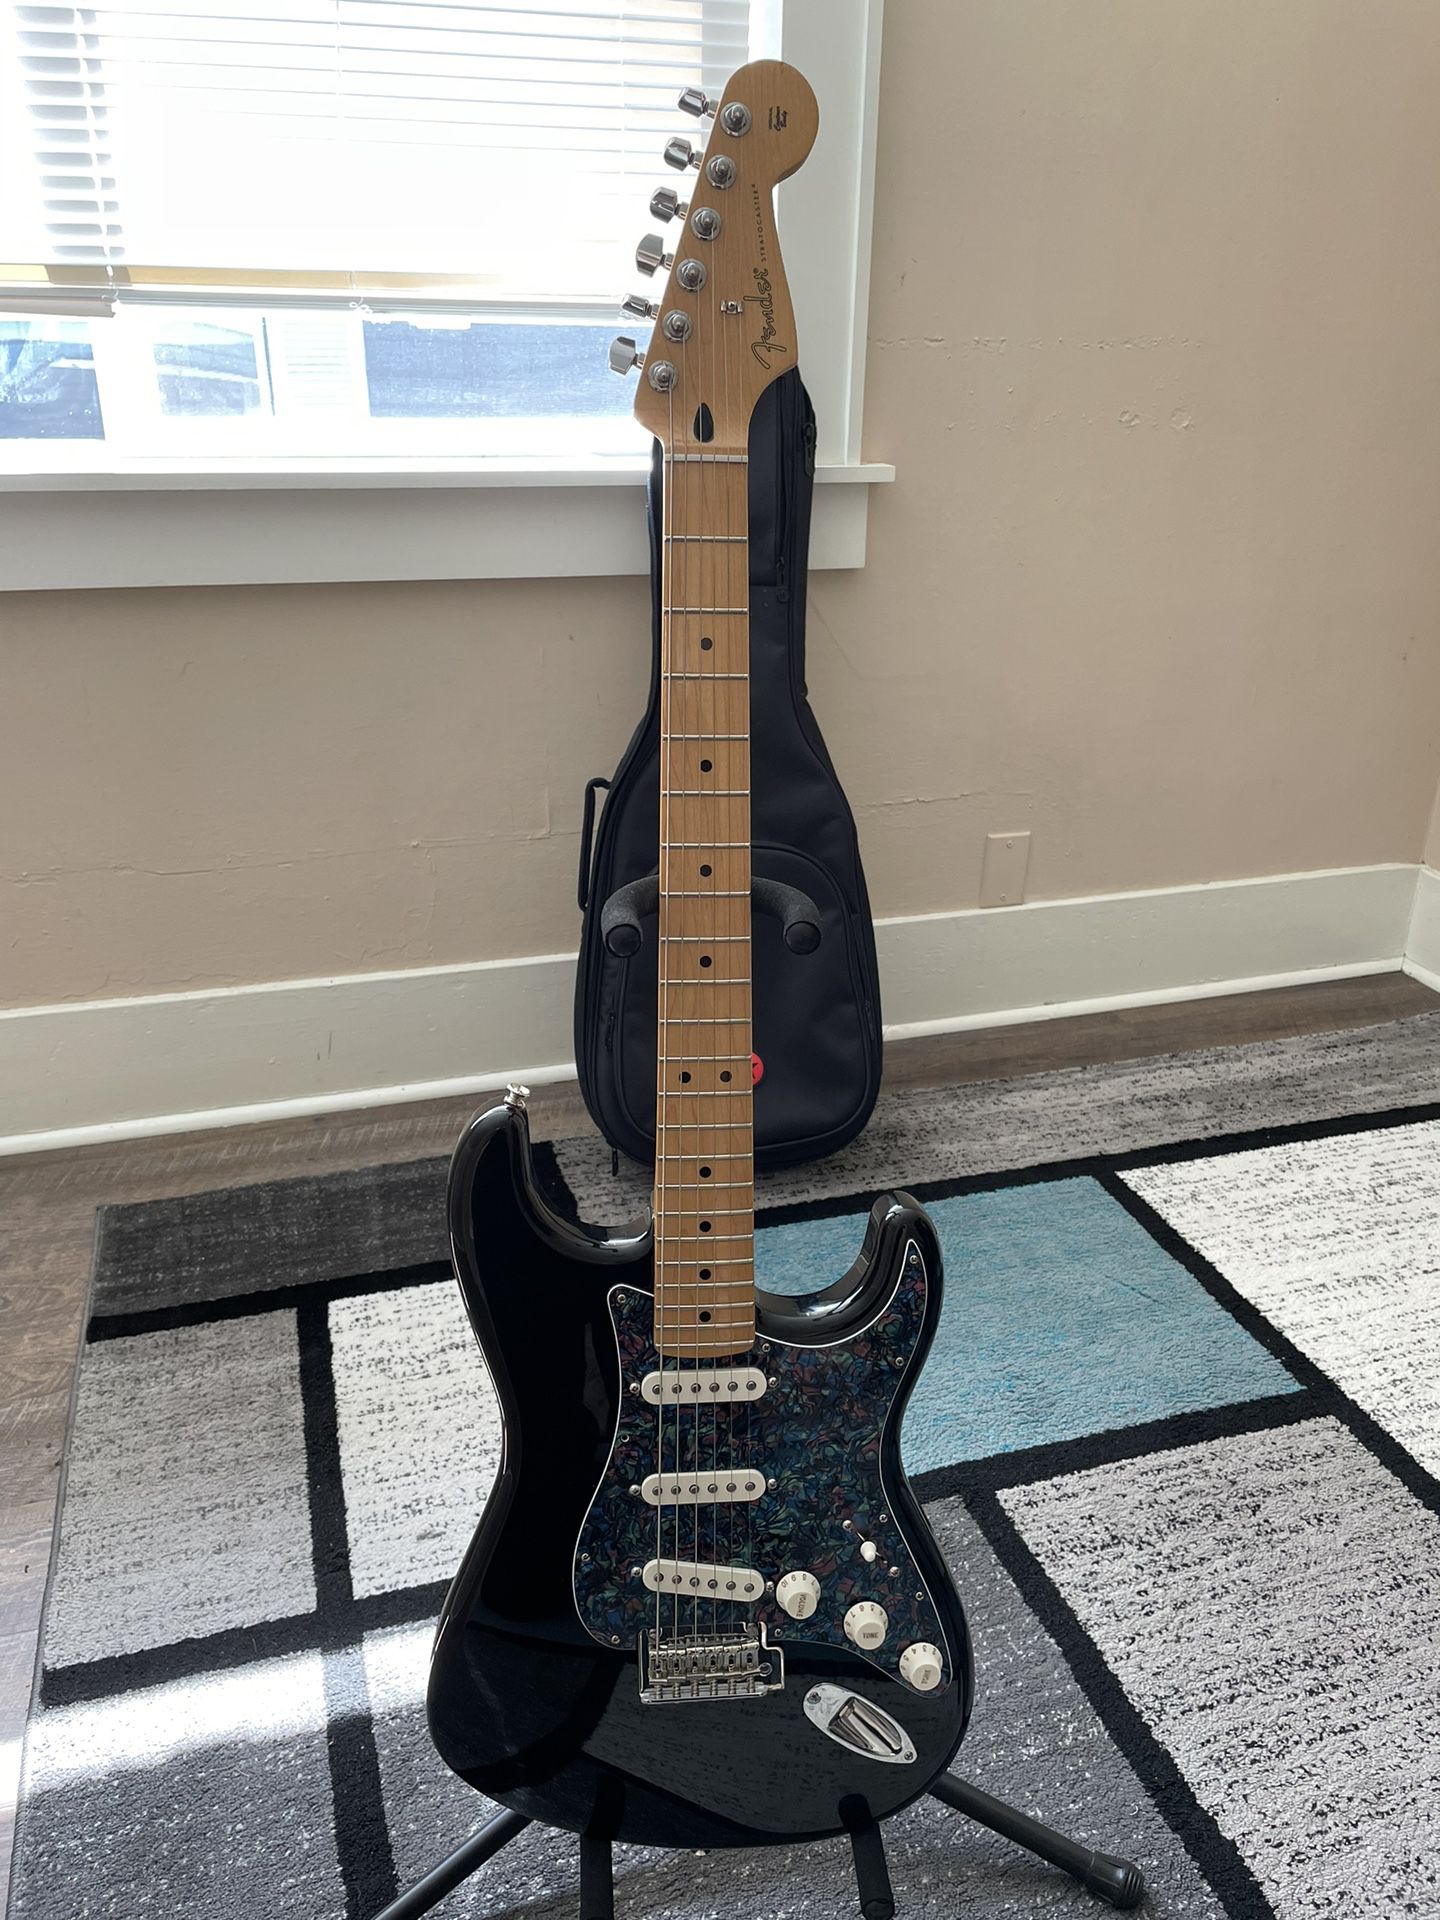 2022 Fender Stratocaster in Mint Condition for Sale in Seattle, WA